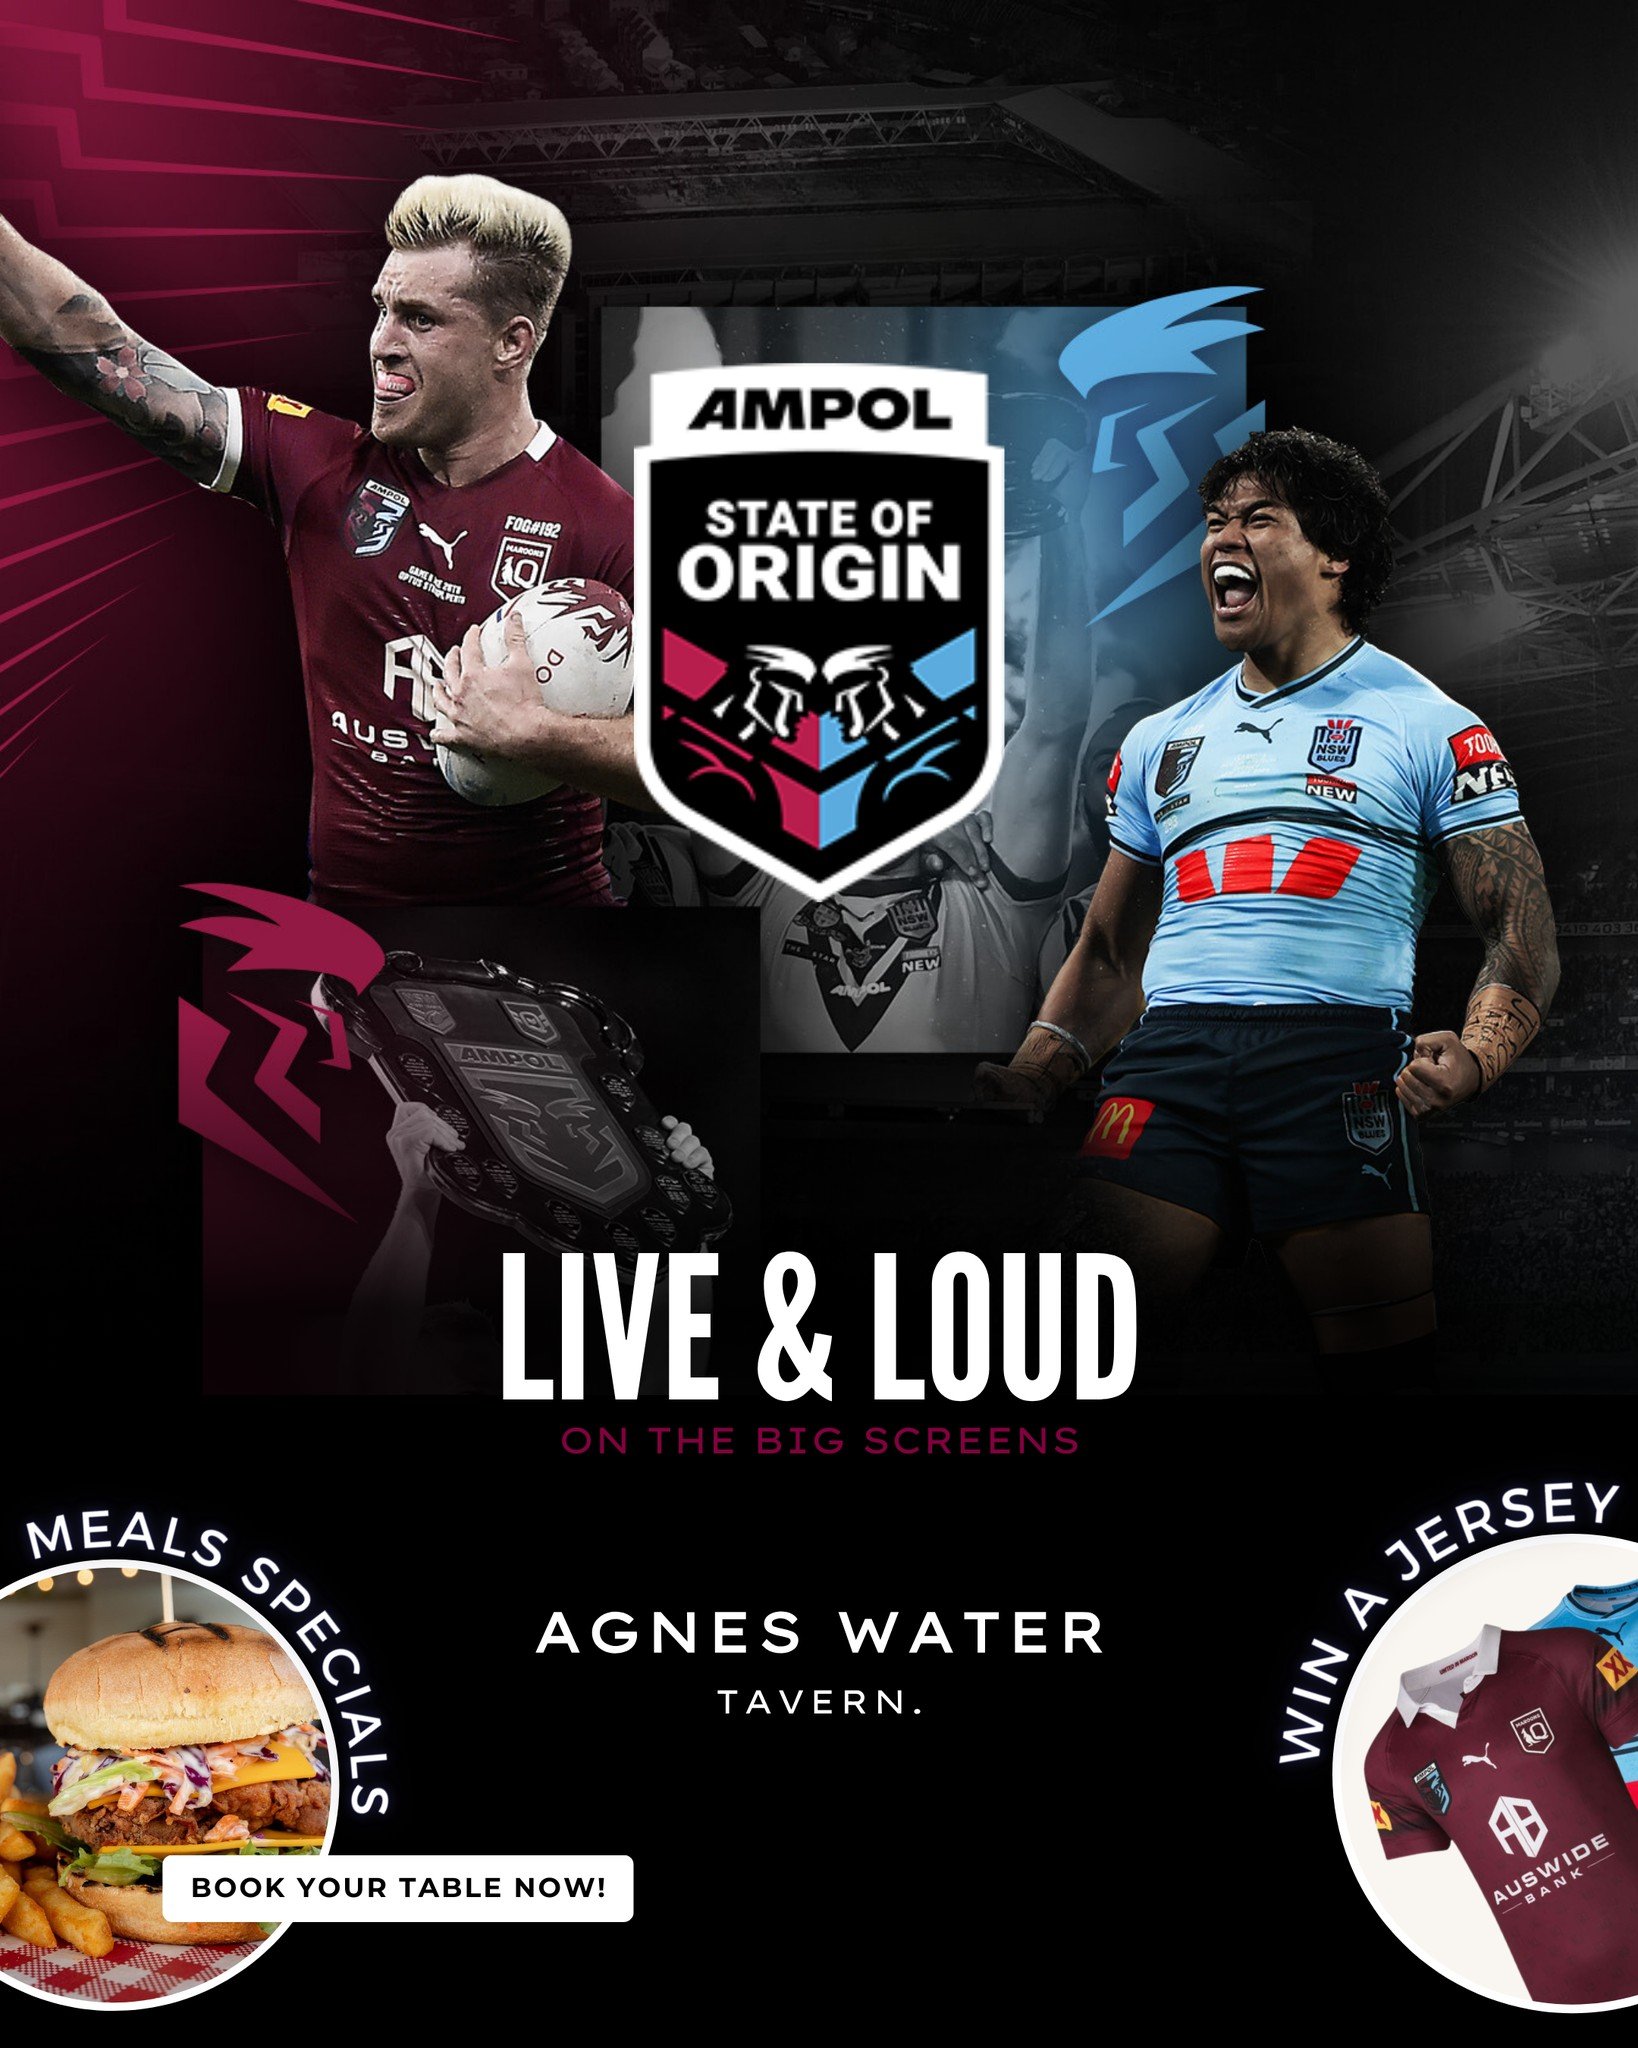 🏉 𝗦𝗧𝗔𝗧𝗘 𝗢𝗙 𝗢𝗥𝗜𝗚𝗜𝗡 - 𝗟𝗜𝗩𝗘 𝗦𝗖𝗥𝗘𝗘𝗡𝗜𝗡𝗚 🏉 📺🔥
Join us at Agnes Water Tavern for the ultimate State of Origin experience on the big screen! Witness the epic showdown between the states with exciting offers just for you:

👕 𝙒?